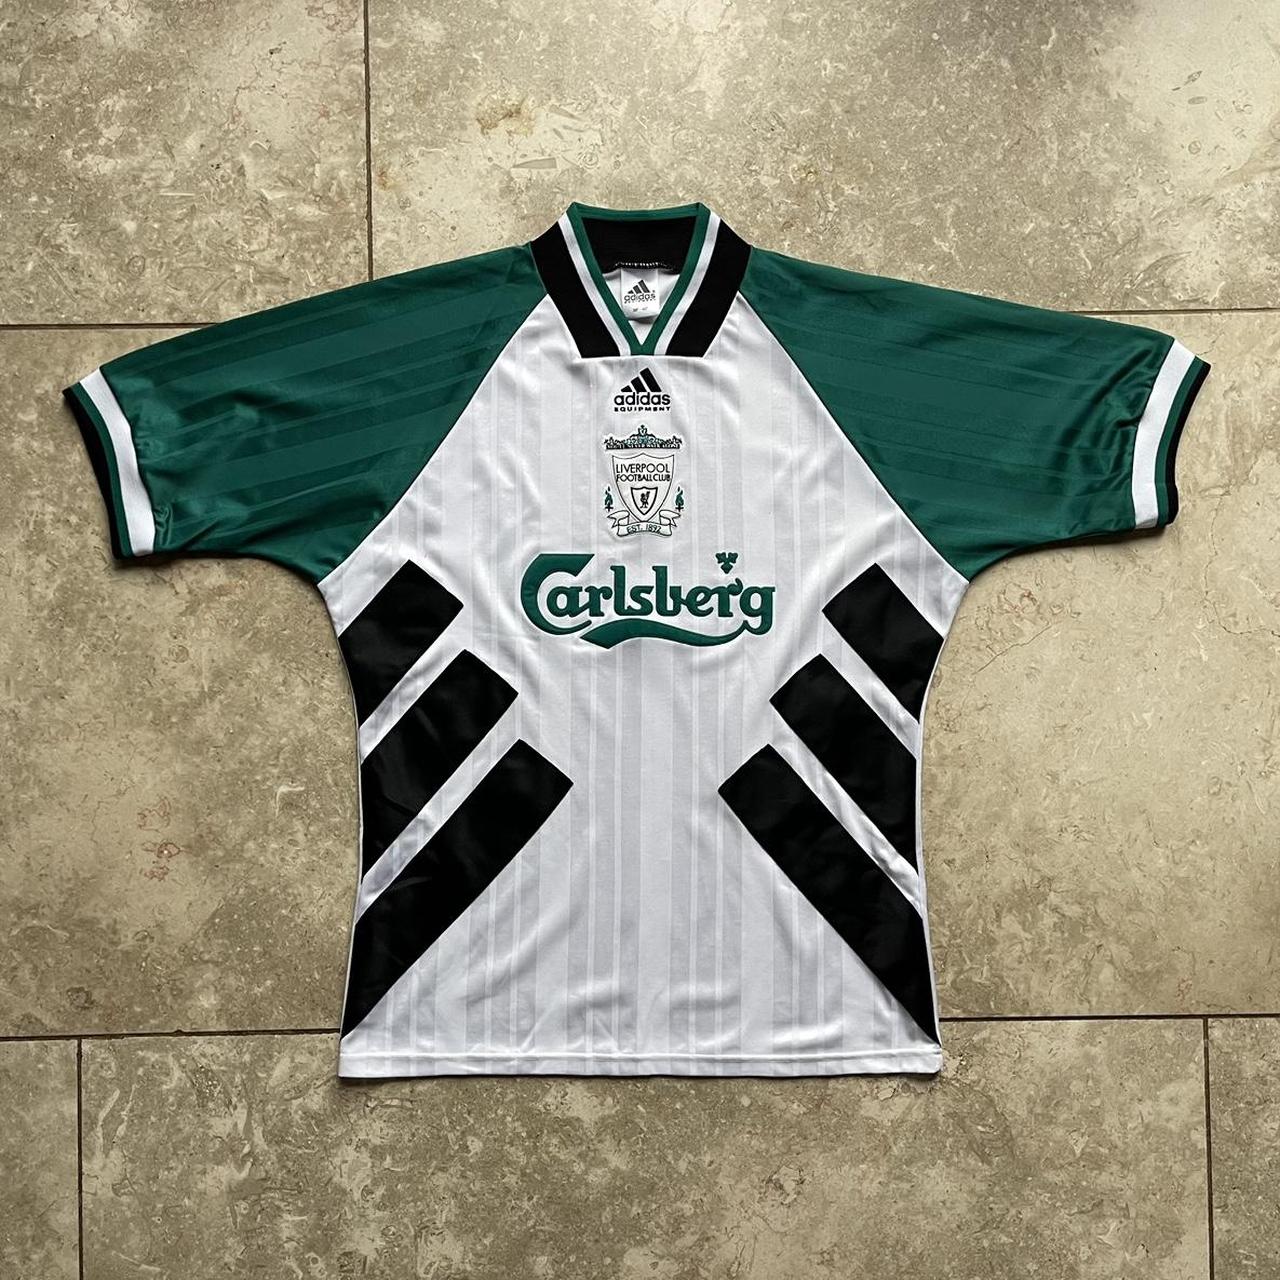 1993-95 Liverpool home shirt by Adidas